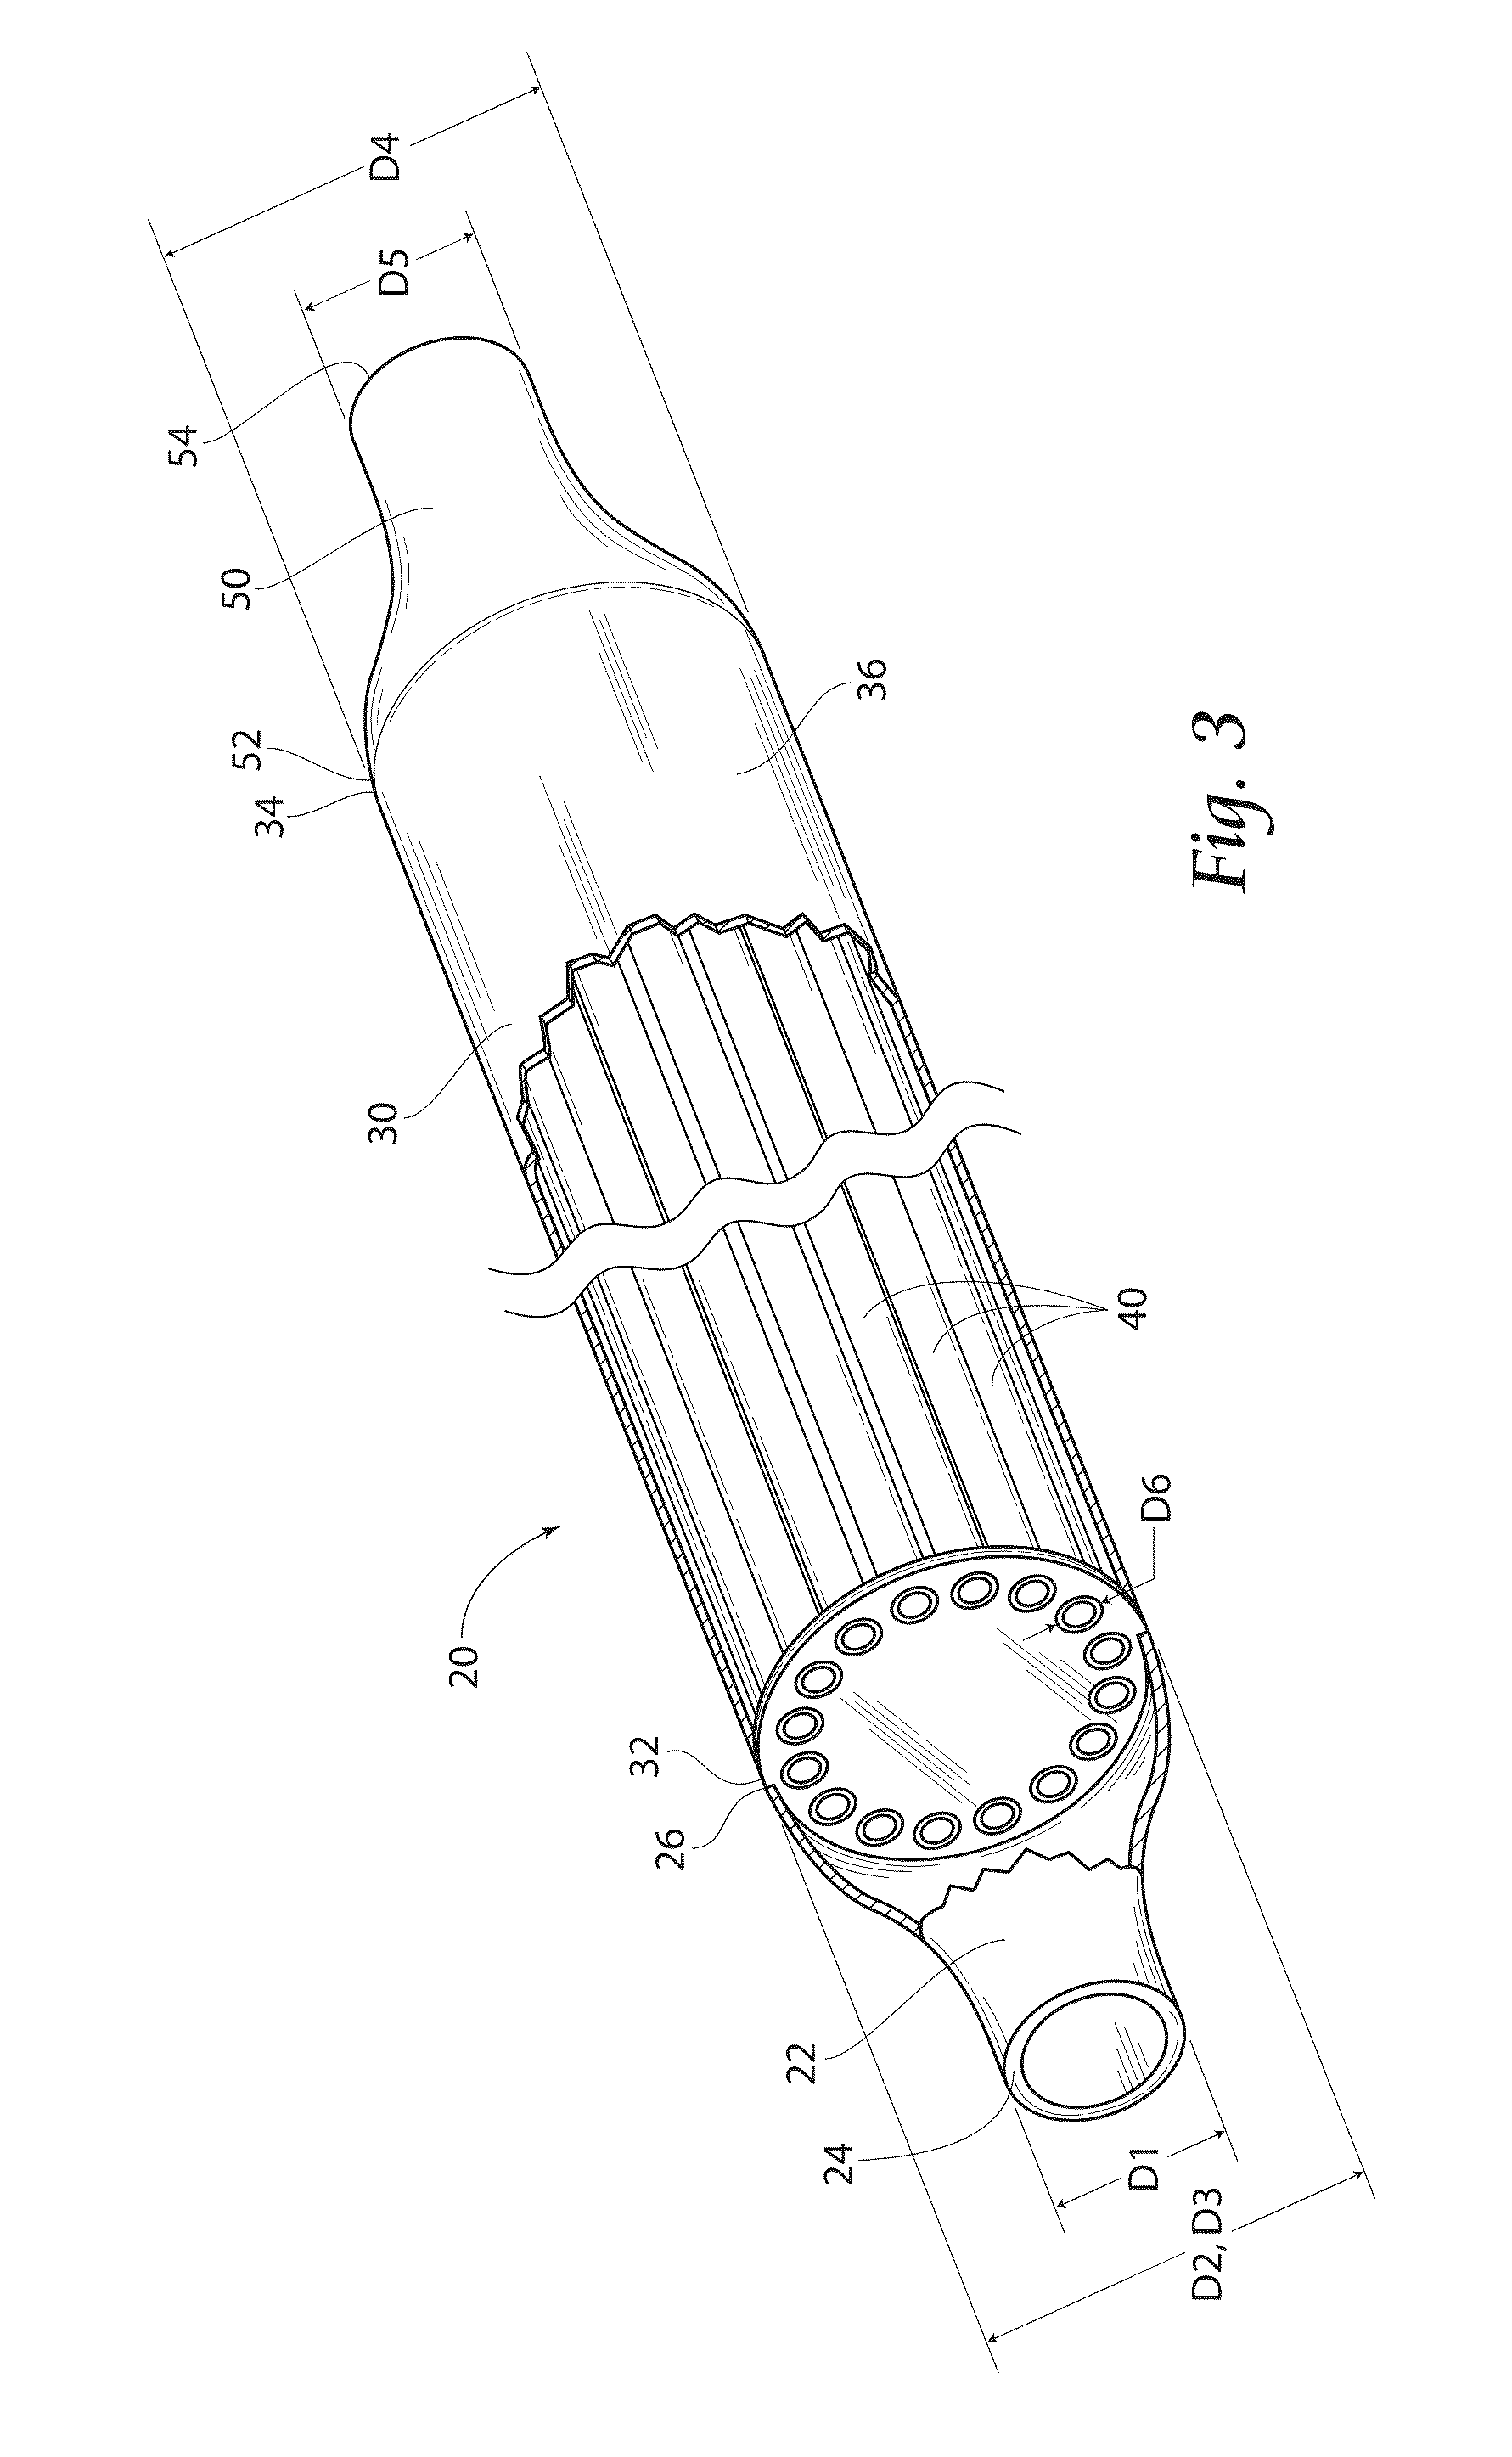 Multi-channel conduit and method for heating a fluid for use in hydraulic fracturing